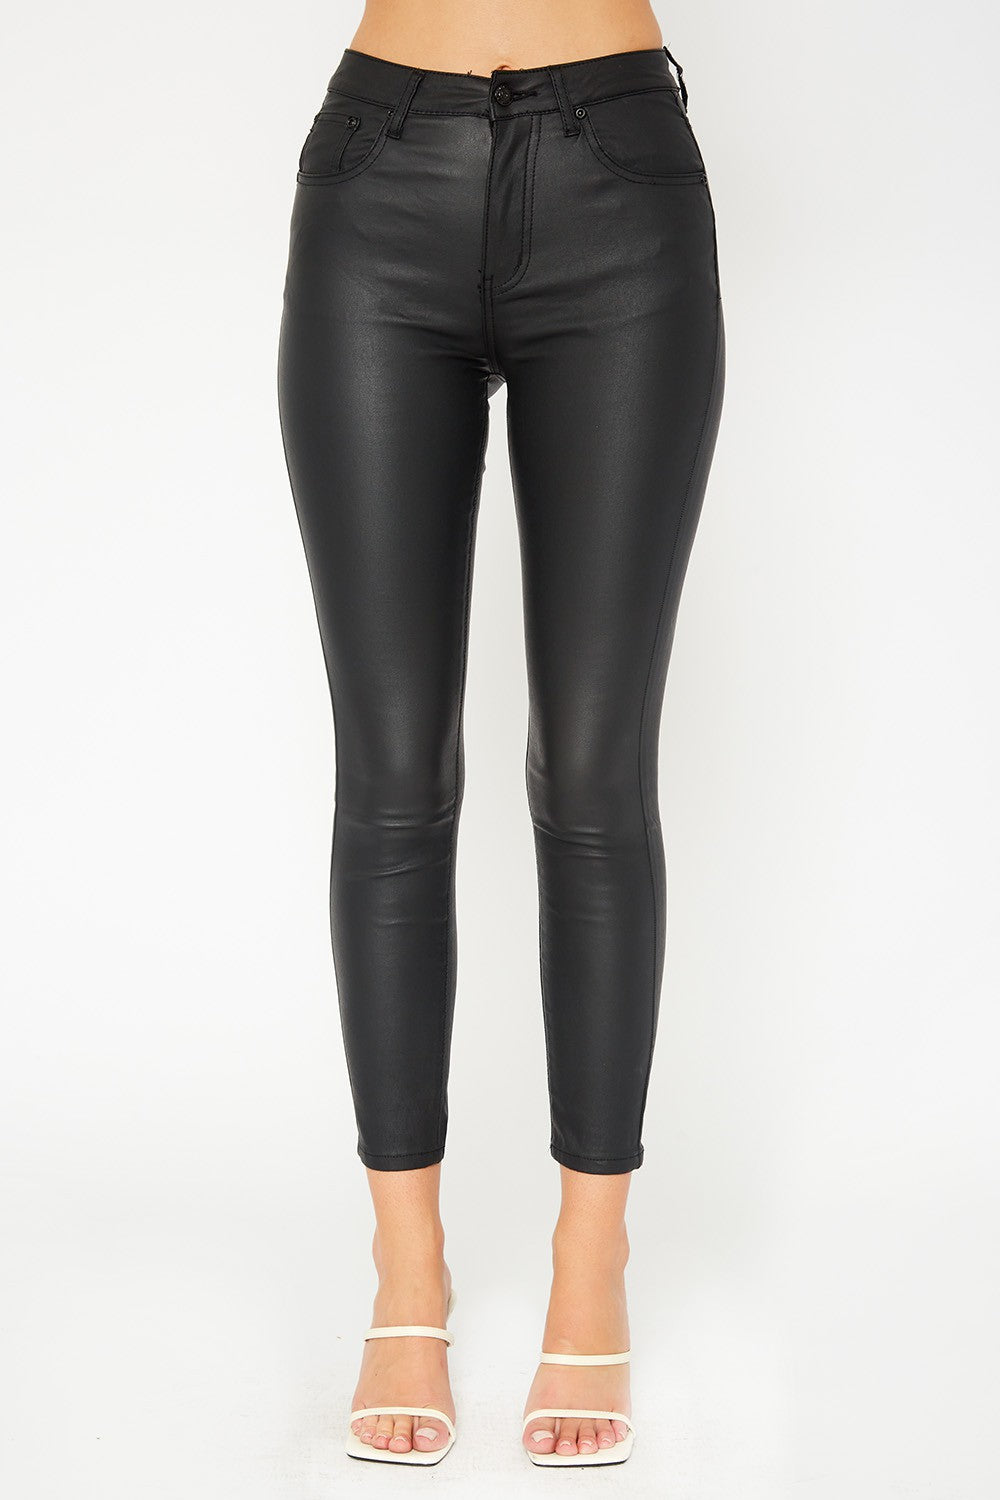 High Rise Black Faux Leather Skinny Pants